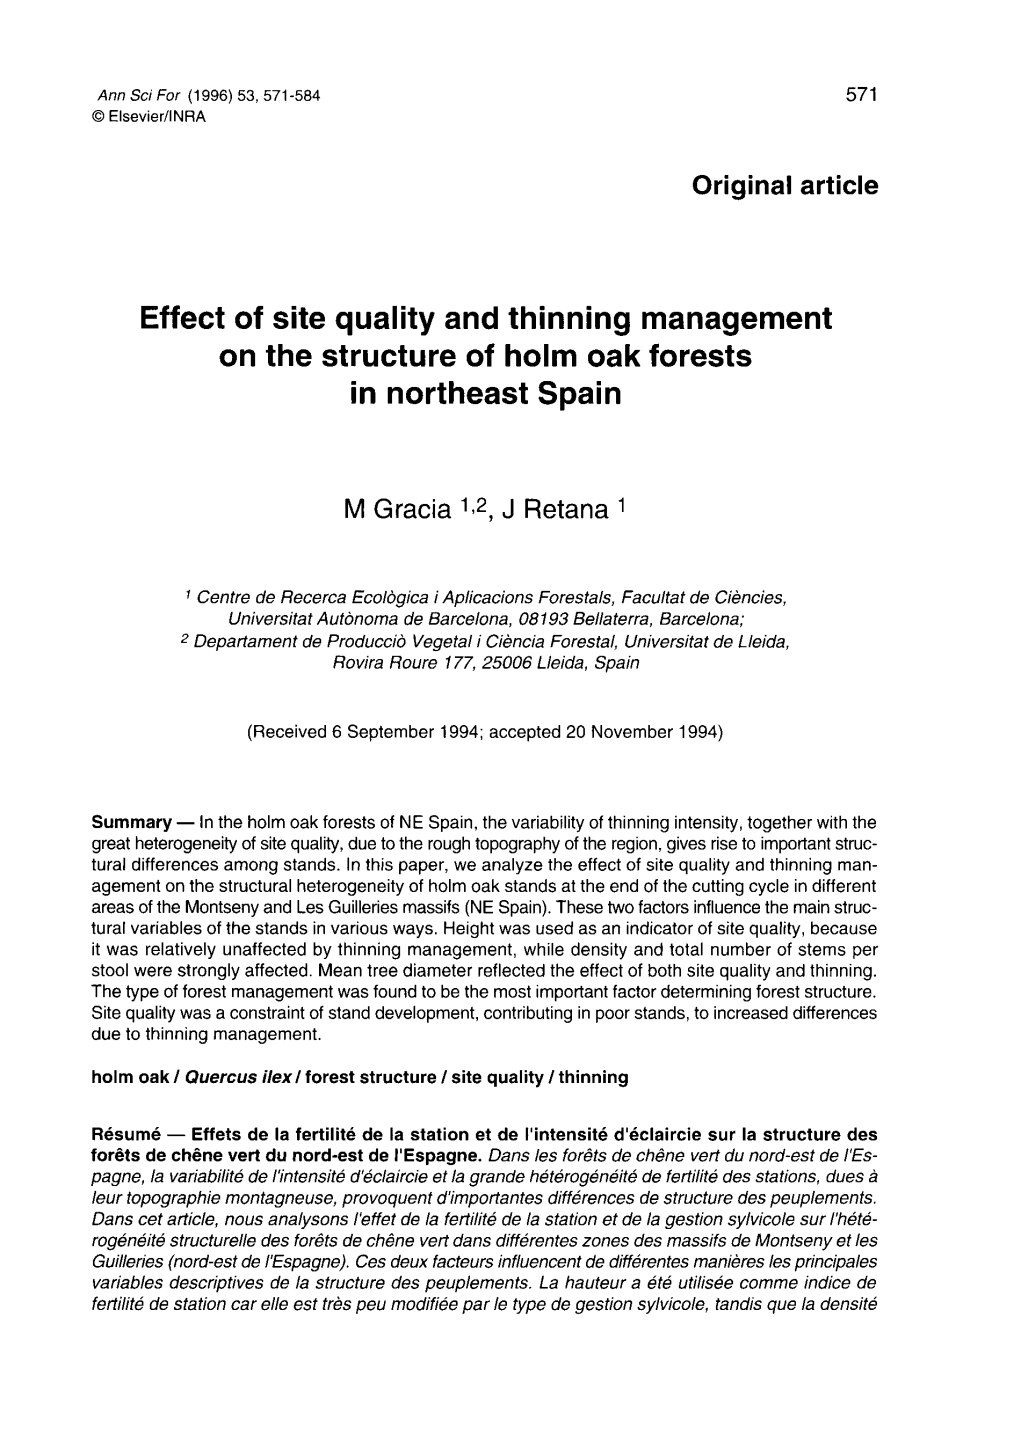 Effect of Site Quality and Thinning Management on the Structure of Holm Oak Forests in Northeast Spain